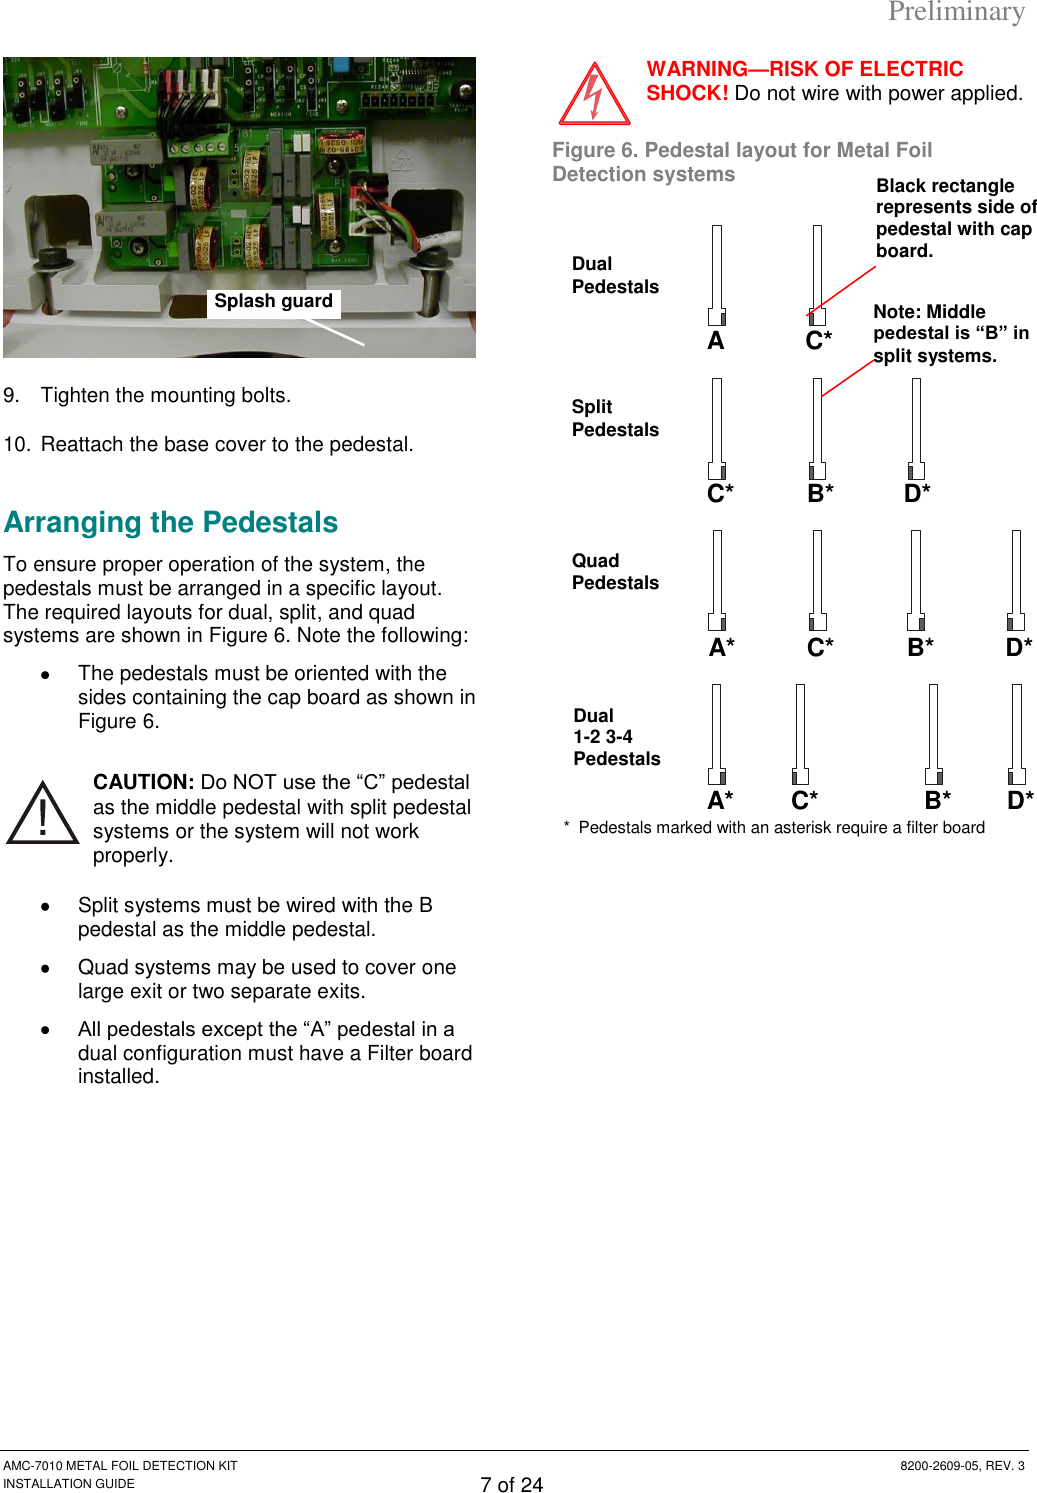 Preliminary AMC-7010 METAL FOIL DETECTION KIT  8200-2609-05, REV. 3 INSTALLATION GUIDE 7 of 24  9.  Tighten the mounting bolts. 10. Reattach the base cover to the pedestal. Arranging the Pedestals To ensure proper operation of the system, the pedestals must be arranged in a specific layout. The required layouts for dual, split, and quad systems are shown in Figure 6. Note the following:    The pedestals must be oriented with the sides containing the cap board as shown in Figure 6. CAUTION: Do NOT use the “C” pedestal as the middle pedestal with split pedestal systems or the system will not work properly.   Split systems must be wired with the B pedestal as the middle pedestal.   Quad systems may be used to cover one large exit or two separate exits.  All pedestals except the “A” pedestal in a dual configuration must have a Filter board installed. WARNING—RISK OF ELECTRIC SHOCK! Do not wire with power applied. Figure 6. Pedestal layout for Metal Foil Detection systems    A C* Dual Pedestals C* B* D* Split Pedestals A* C* B* D* Quad Pedestals Splash guard A* C* B* D* Dual 1-2 3-4 Pedestals *  Pedestals marked with an asterisk require a filter board Note: Middle pedestal is ―B‖ in split systems. Black rectangle represents side of pedestal with cap board. 